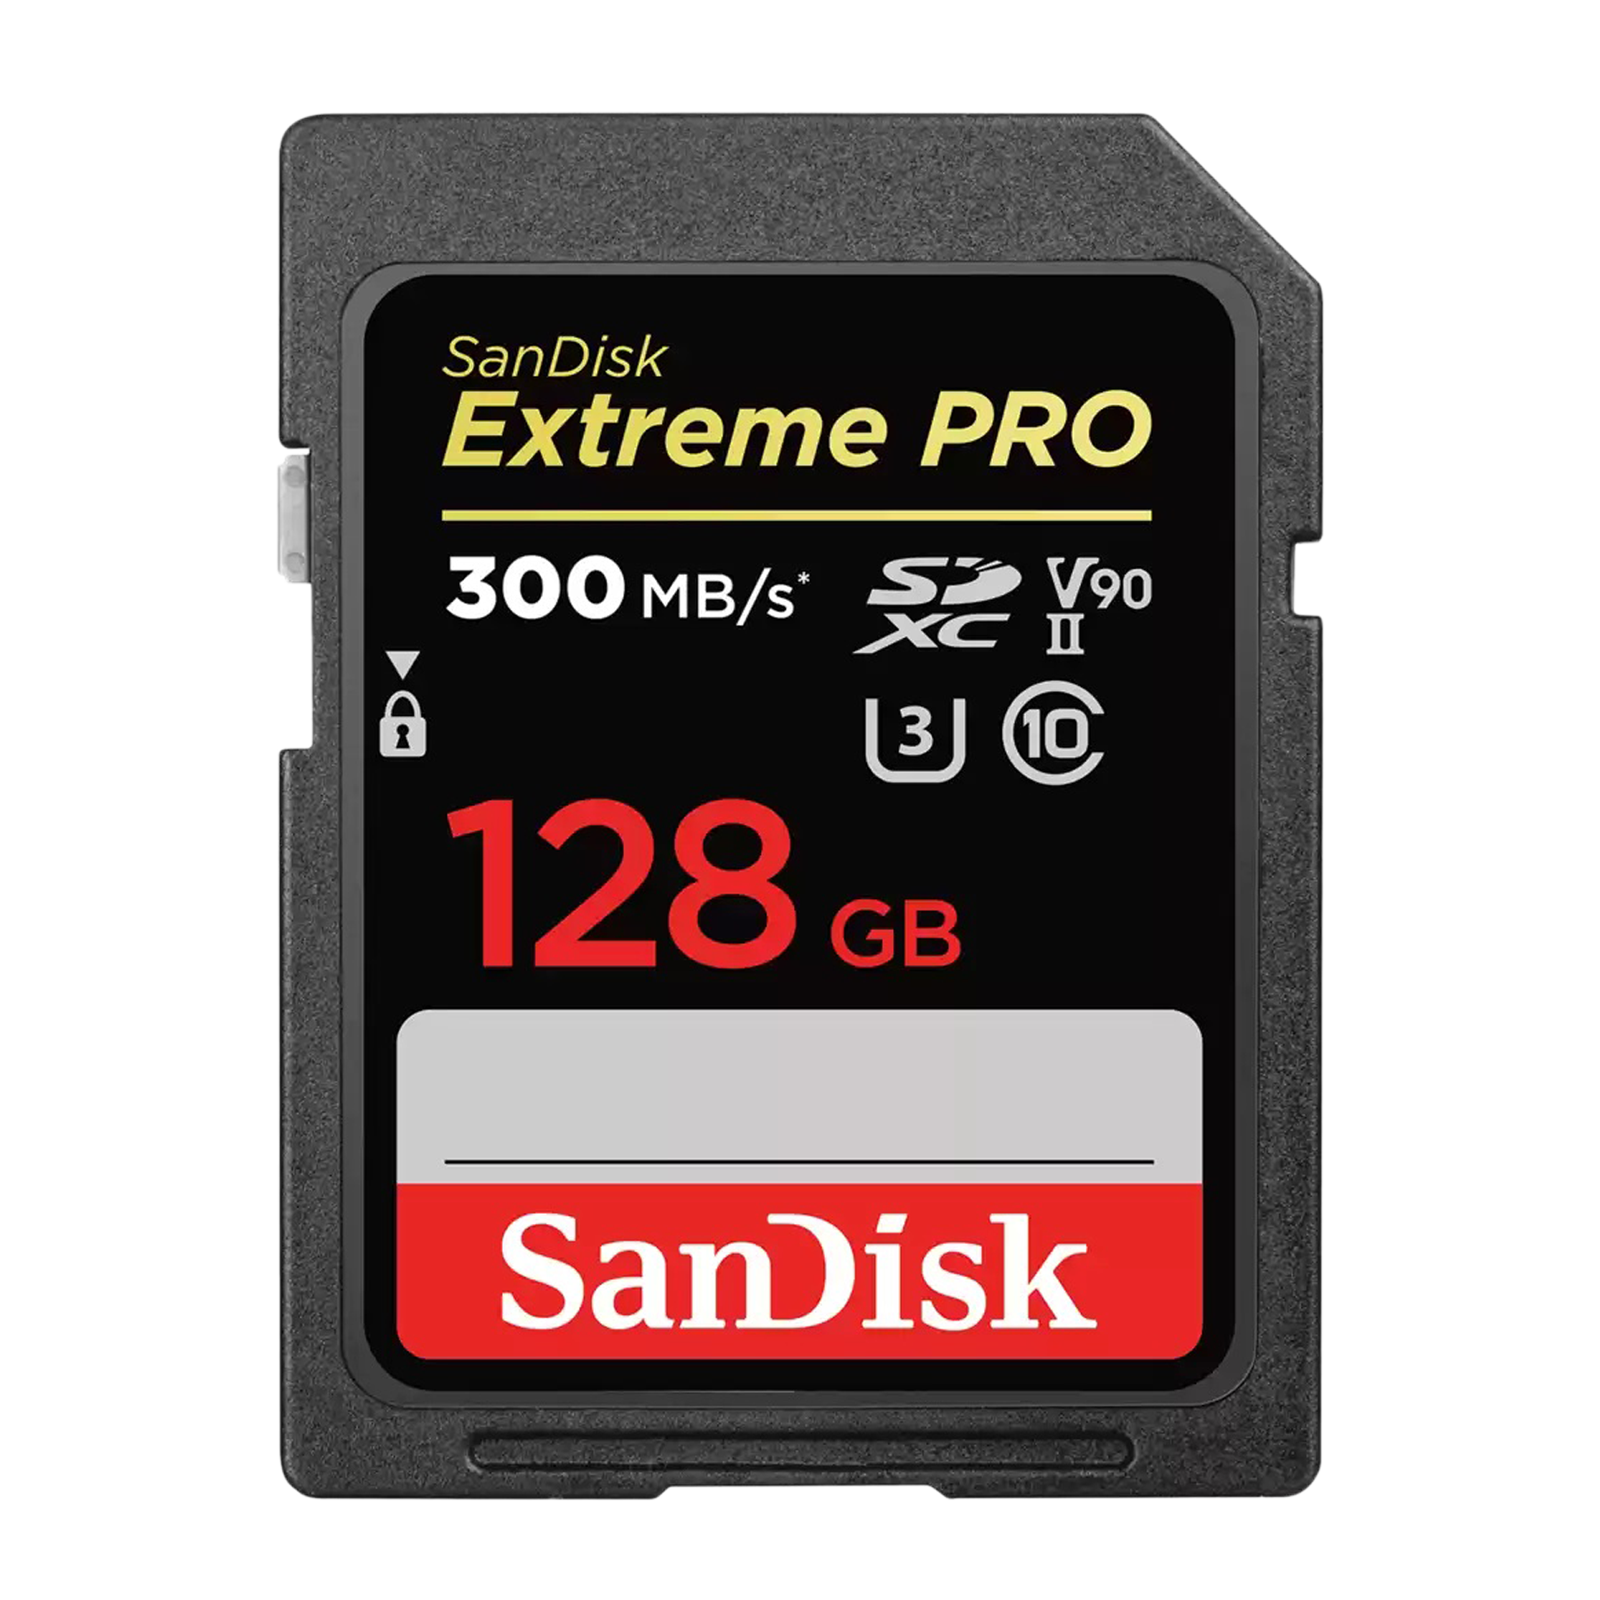 SanDisk Extreme Pro SDXC 128GB Class 10 300MB/s Memory Card